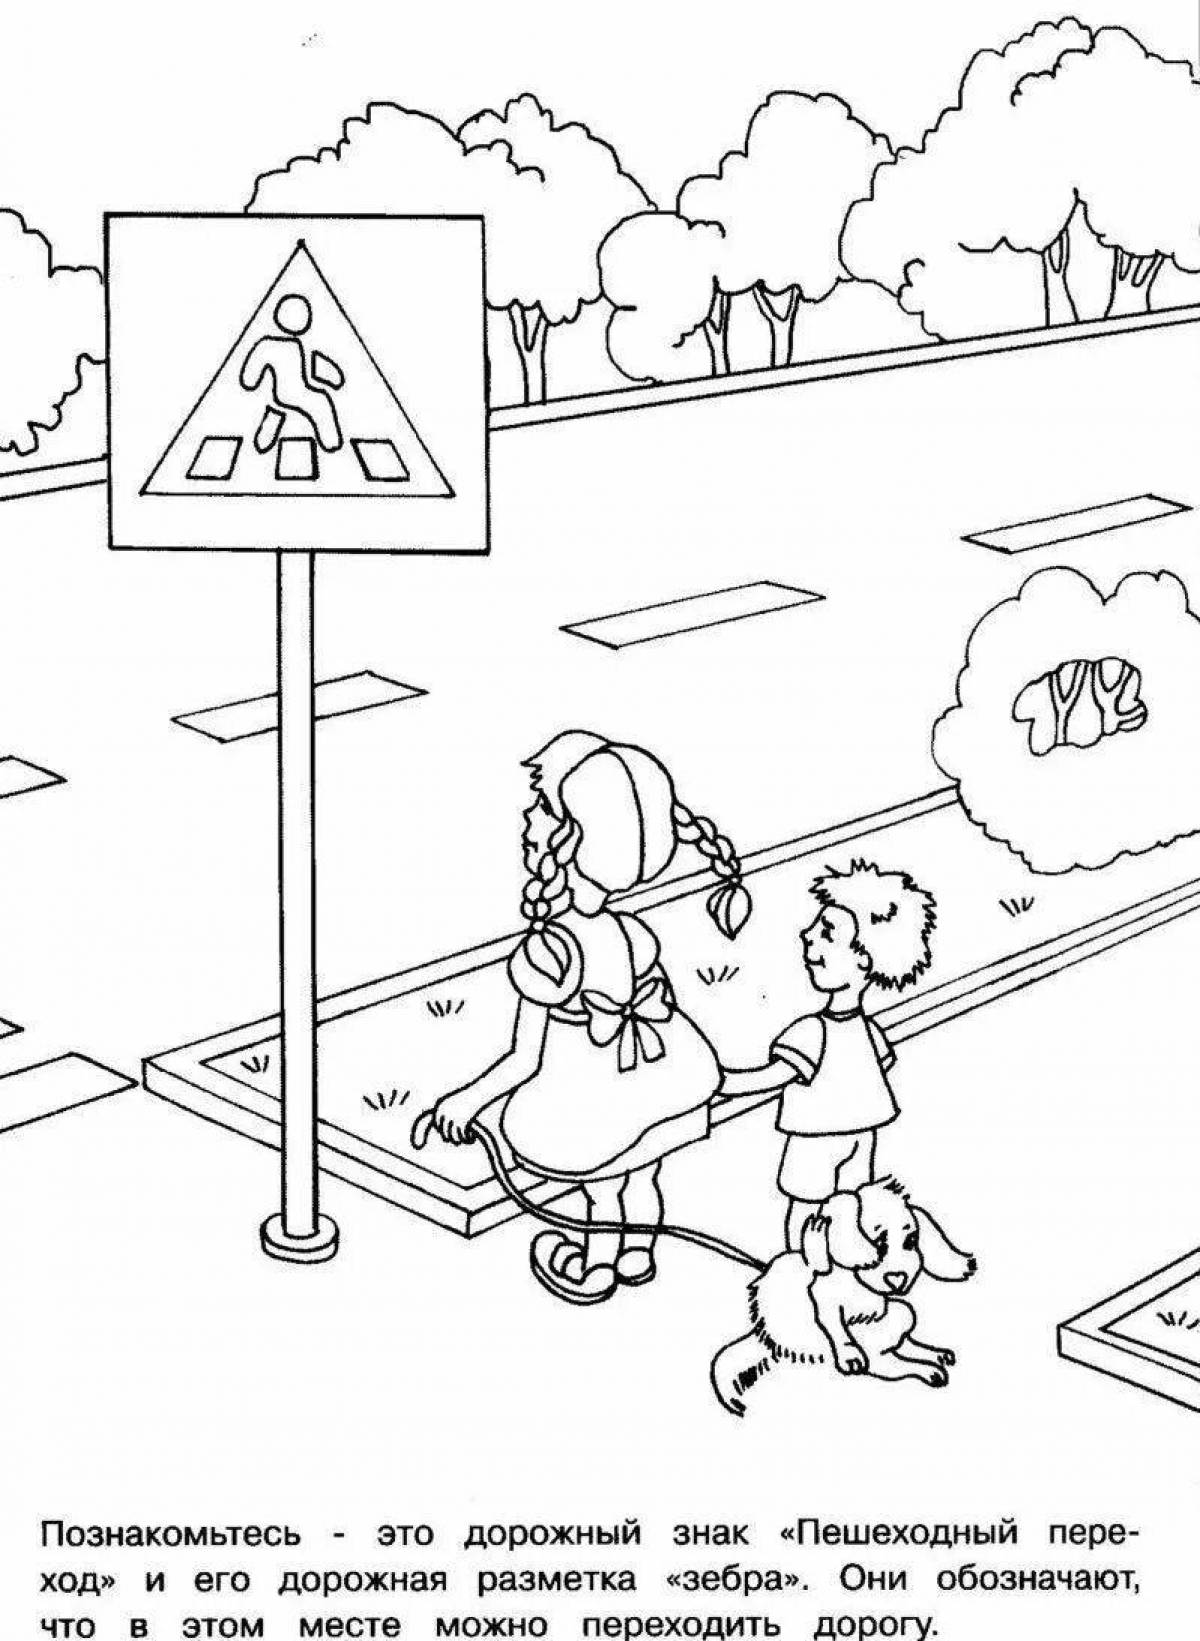 Coloring pages crosswalk crosswalk for children 6-7 years old